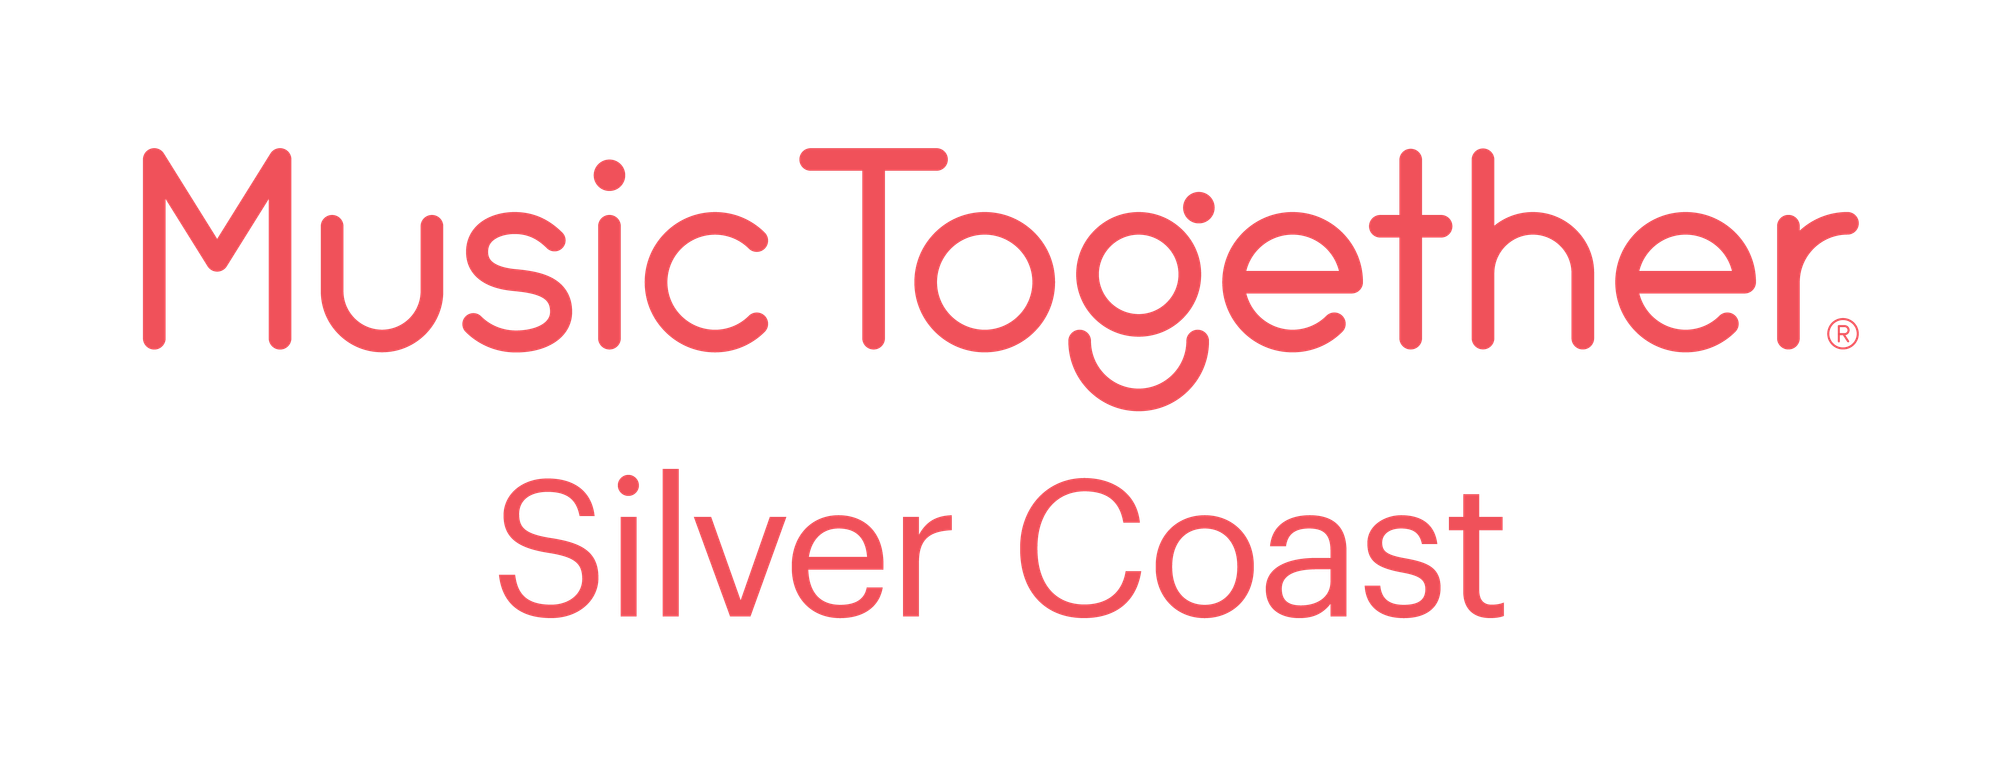 Music Together Silver Coast: Hitting the Right Chord for Families